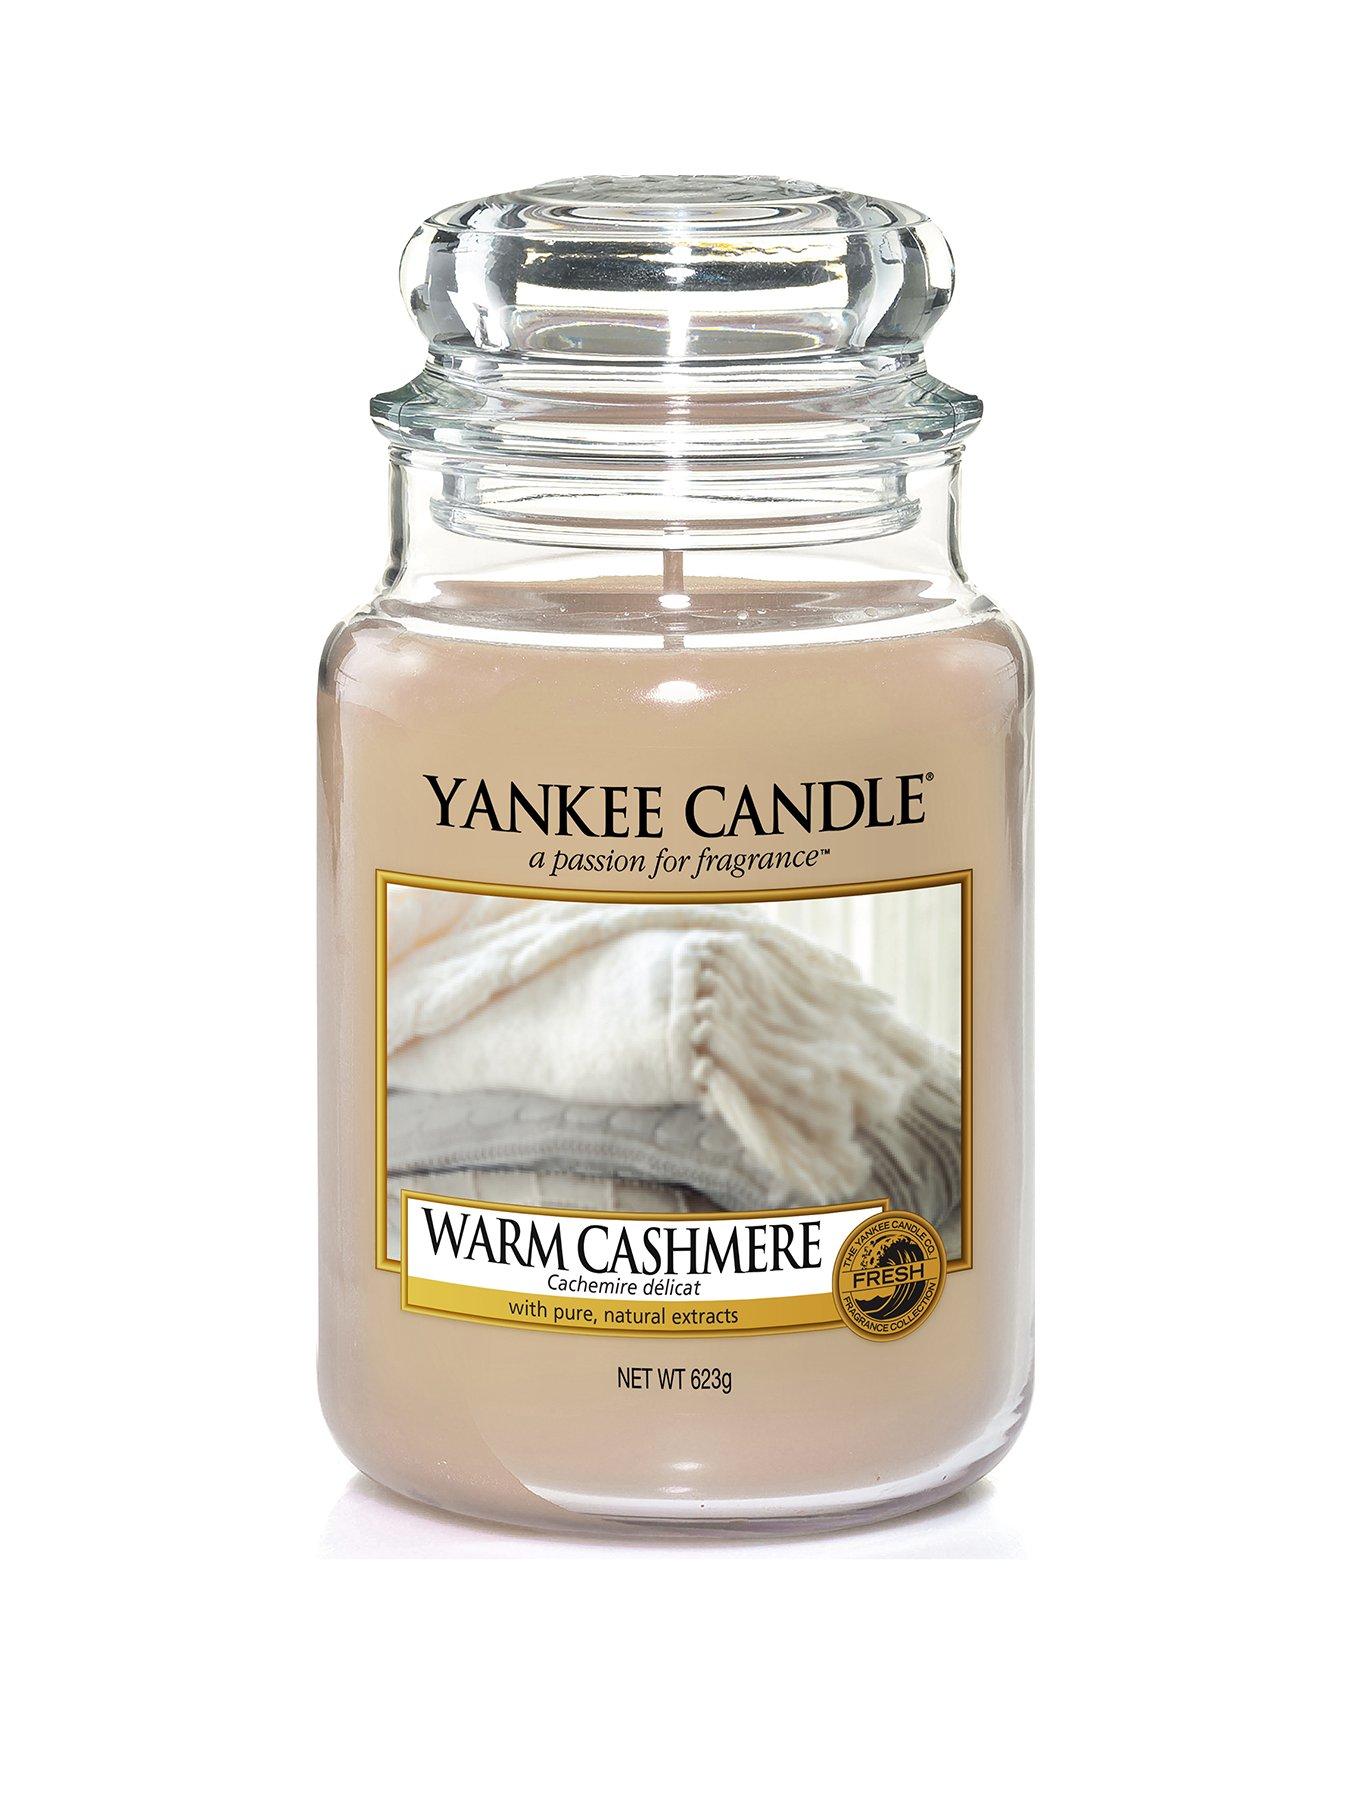  Yankee Candle French Vanilla Scented, Classic 22oz Large Jar  Single Wick Candle, Over 110 Hours of Burn Time : Home & Kitchen